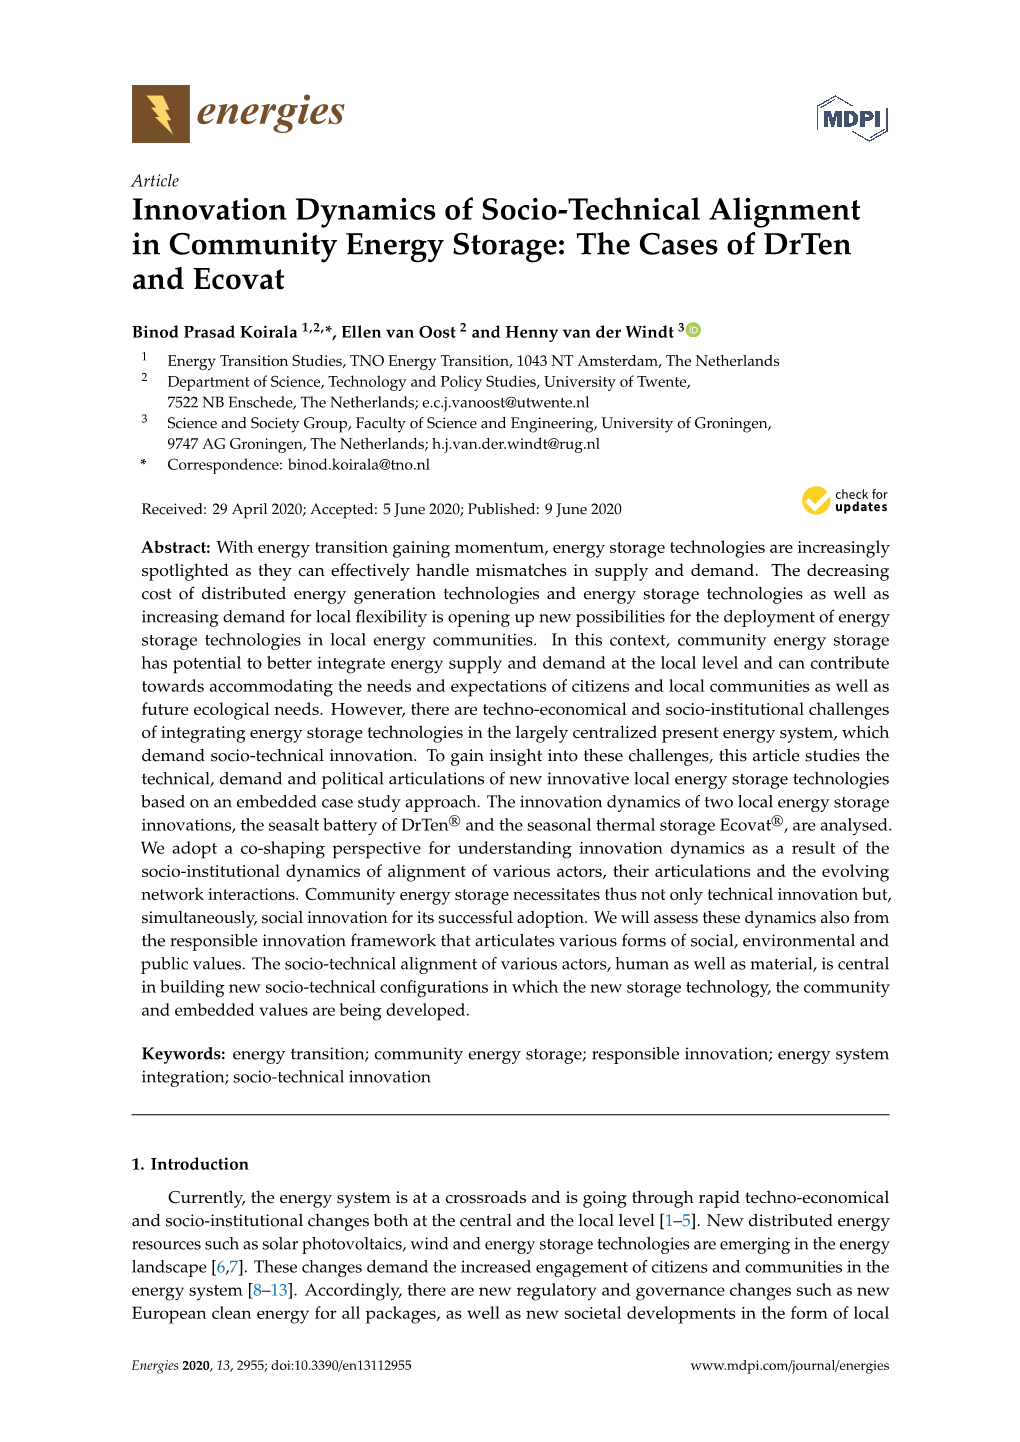 Innovation Dynamics of Socio-Technical Alignment in Community Energy Storage: the Cases of Drten and Ecovat